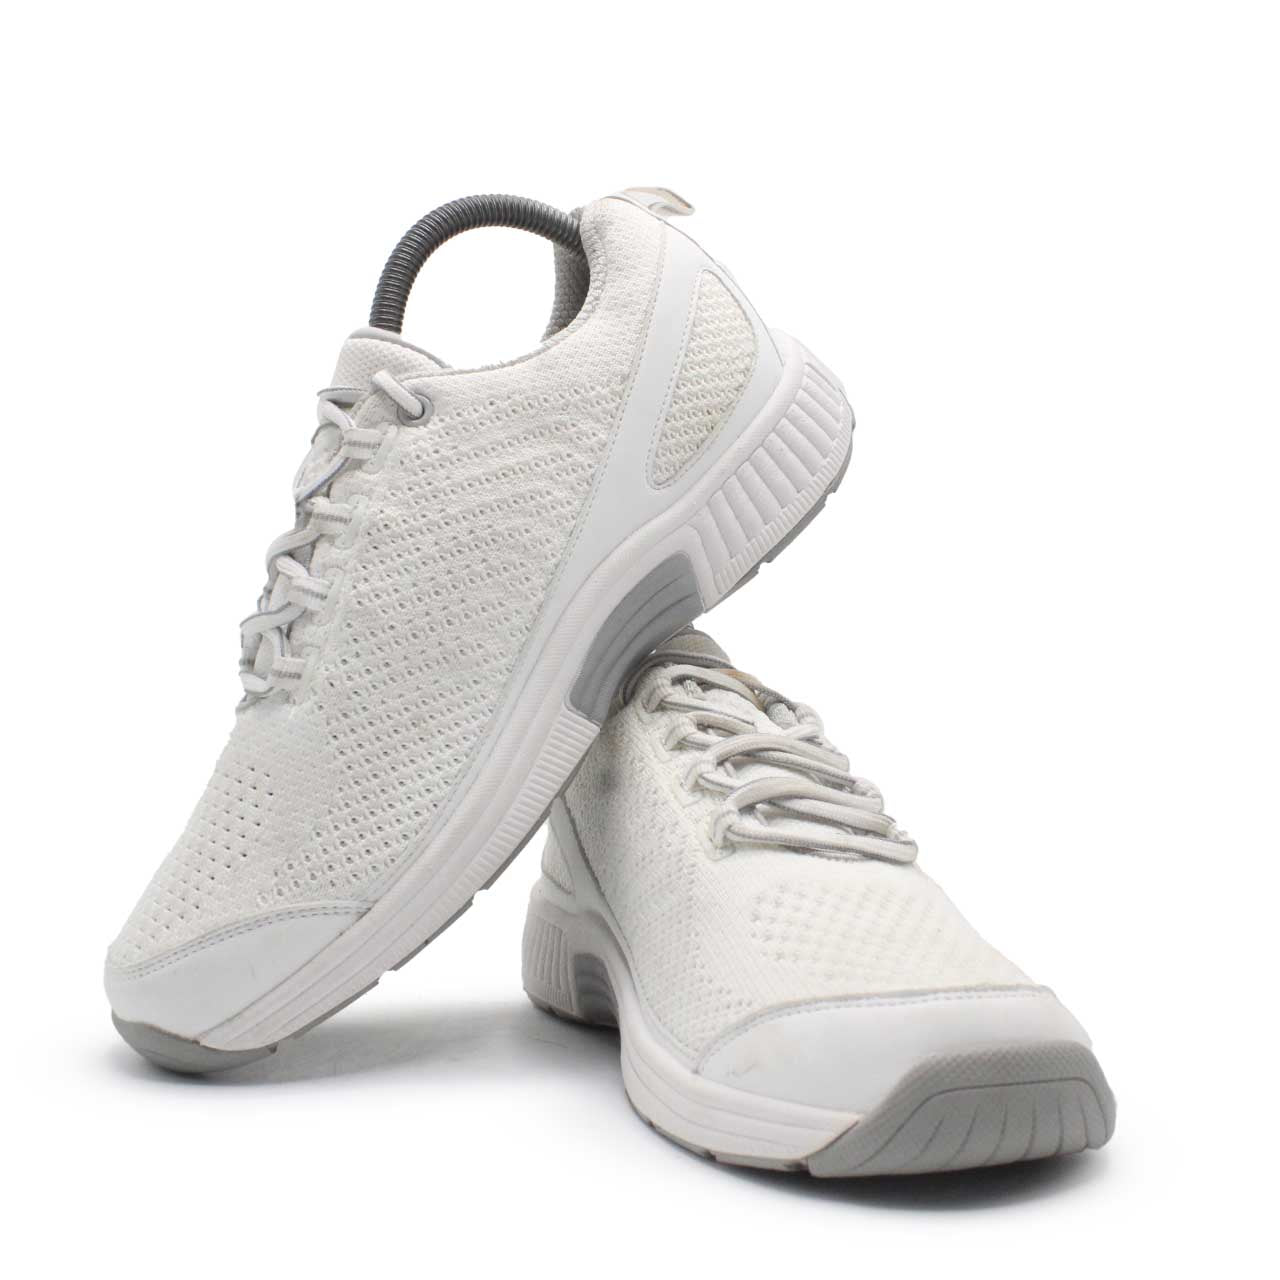 OrthoFeet Stretch Knit Sneaker